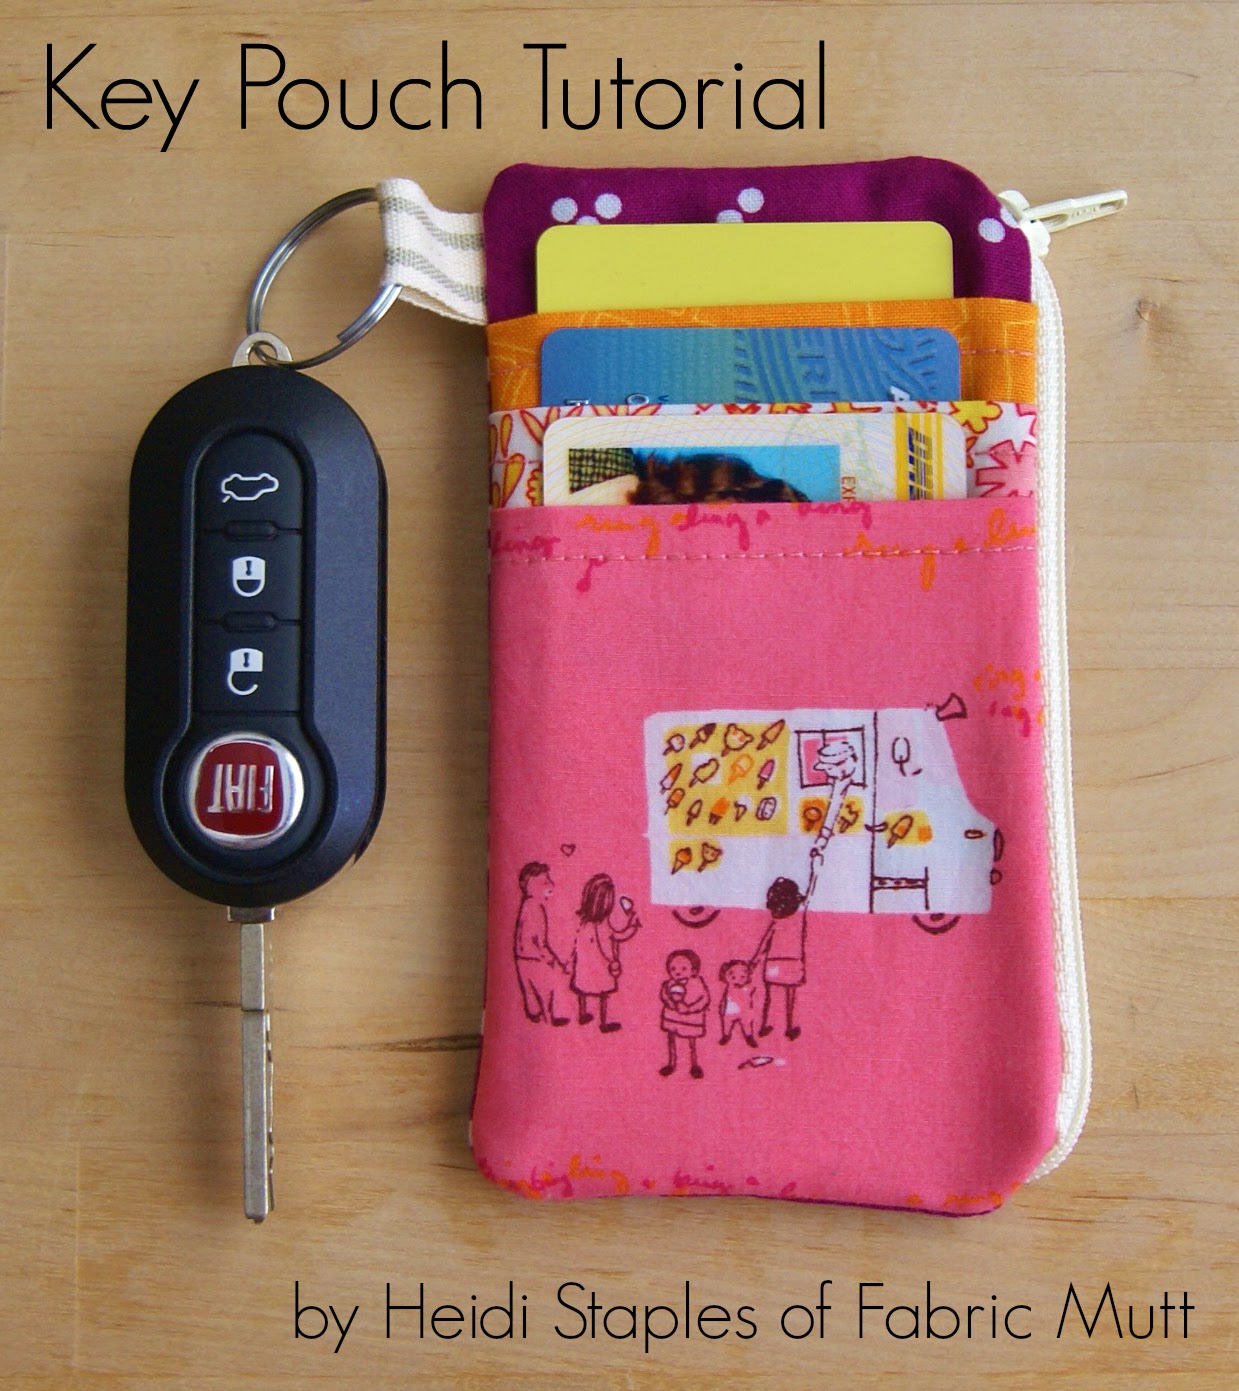 Key Pouch Tutorial by Heidi Staples at Fabric Mutt